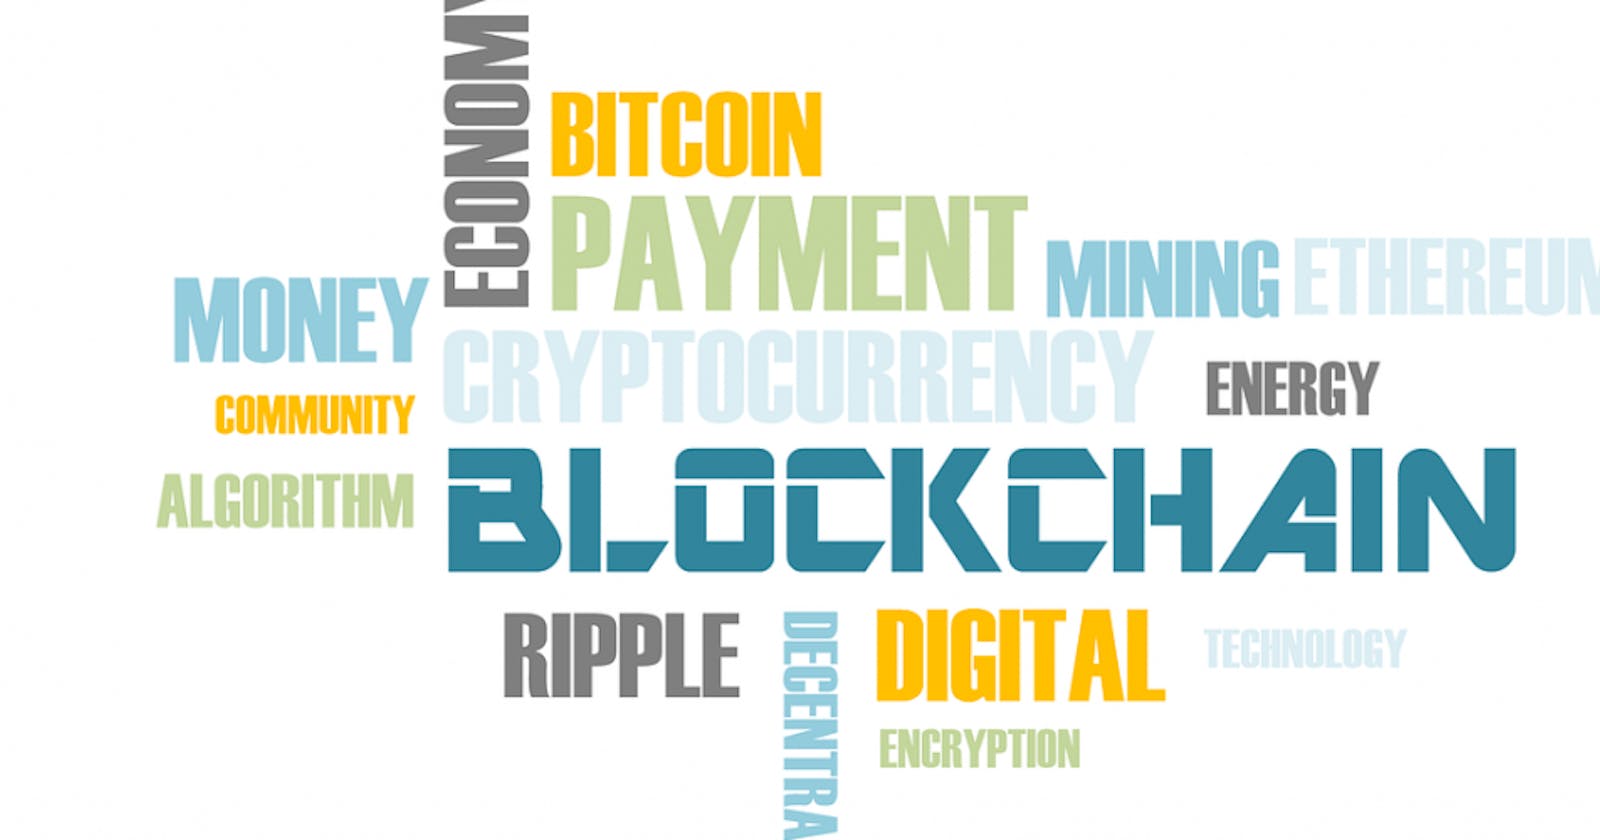 BlockChain: Basics To Know About